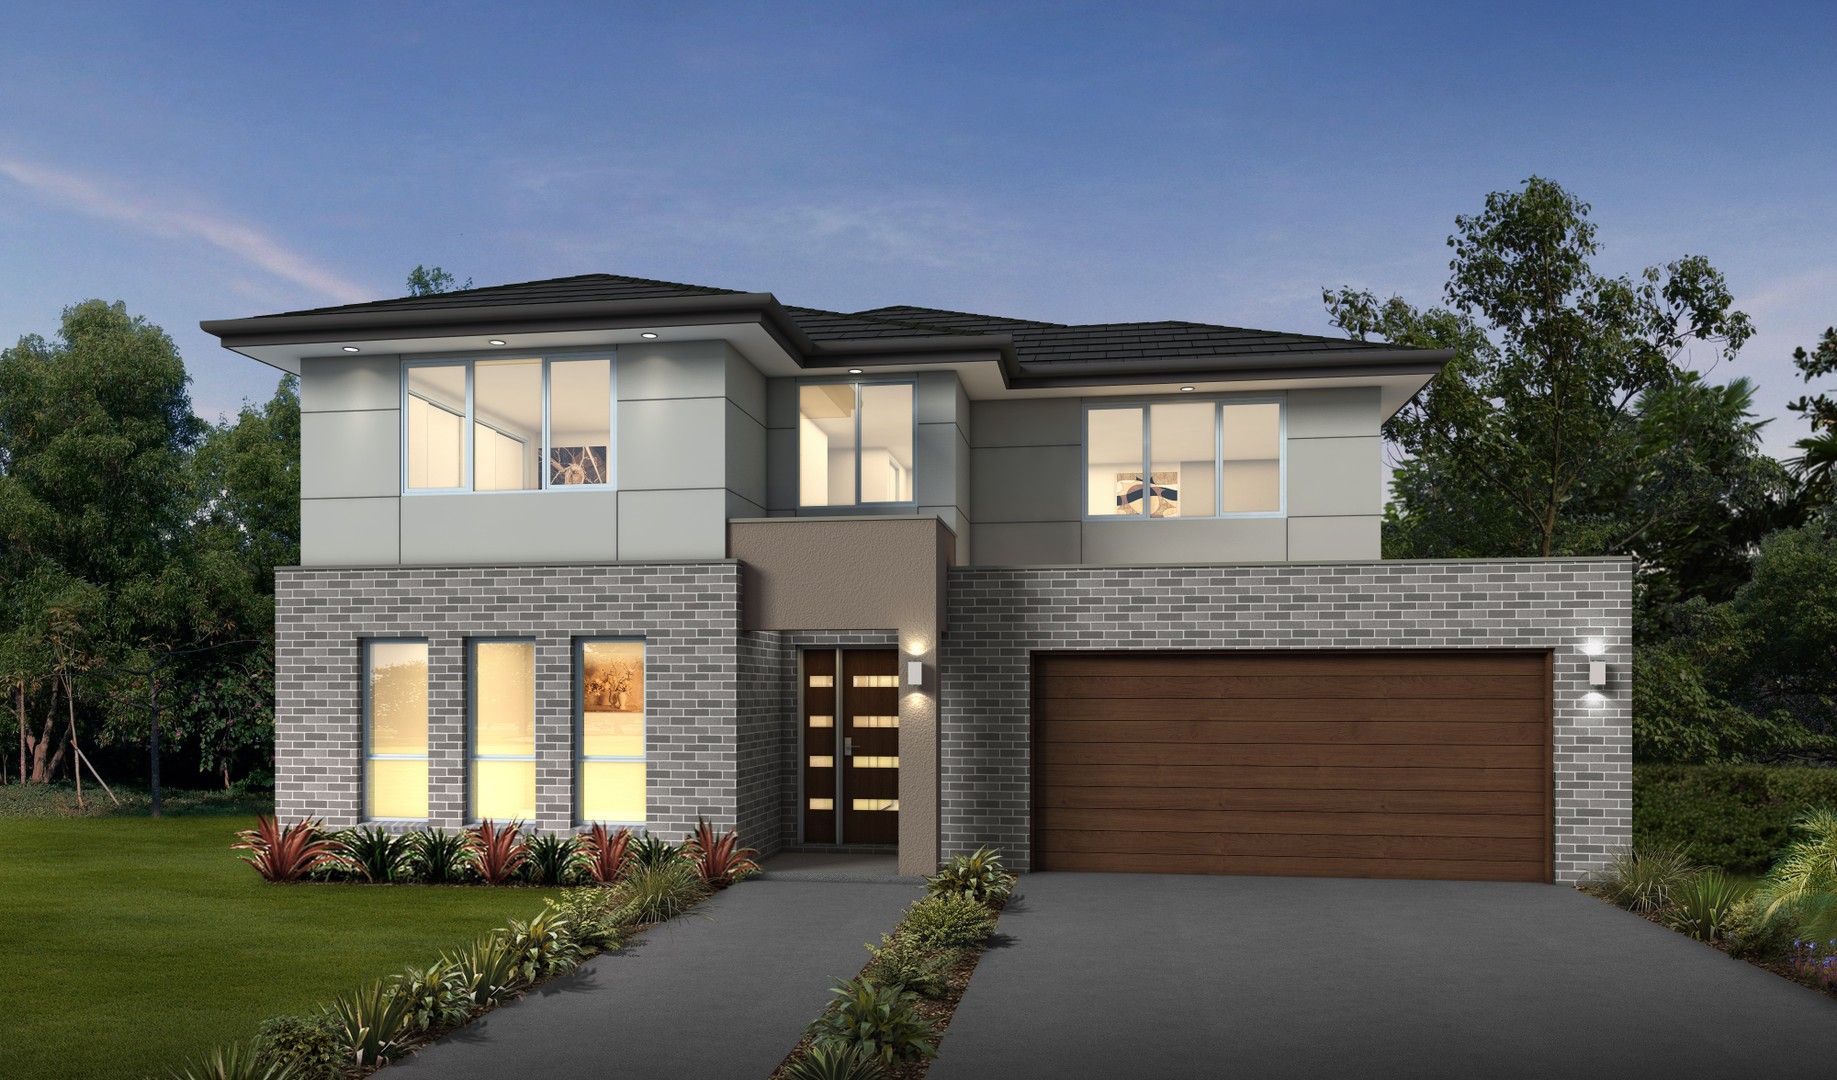 6 bedrooms New House & Land in Lot 20 Wirraway Boulevard CAMBEWARRA NSW, 2540